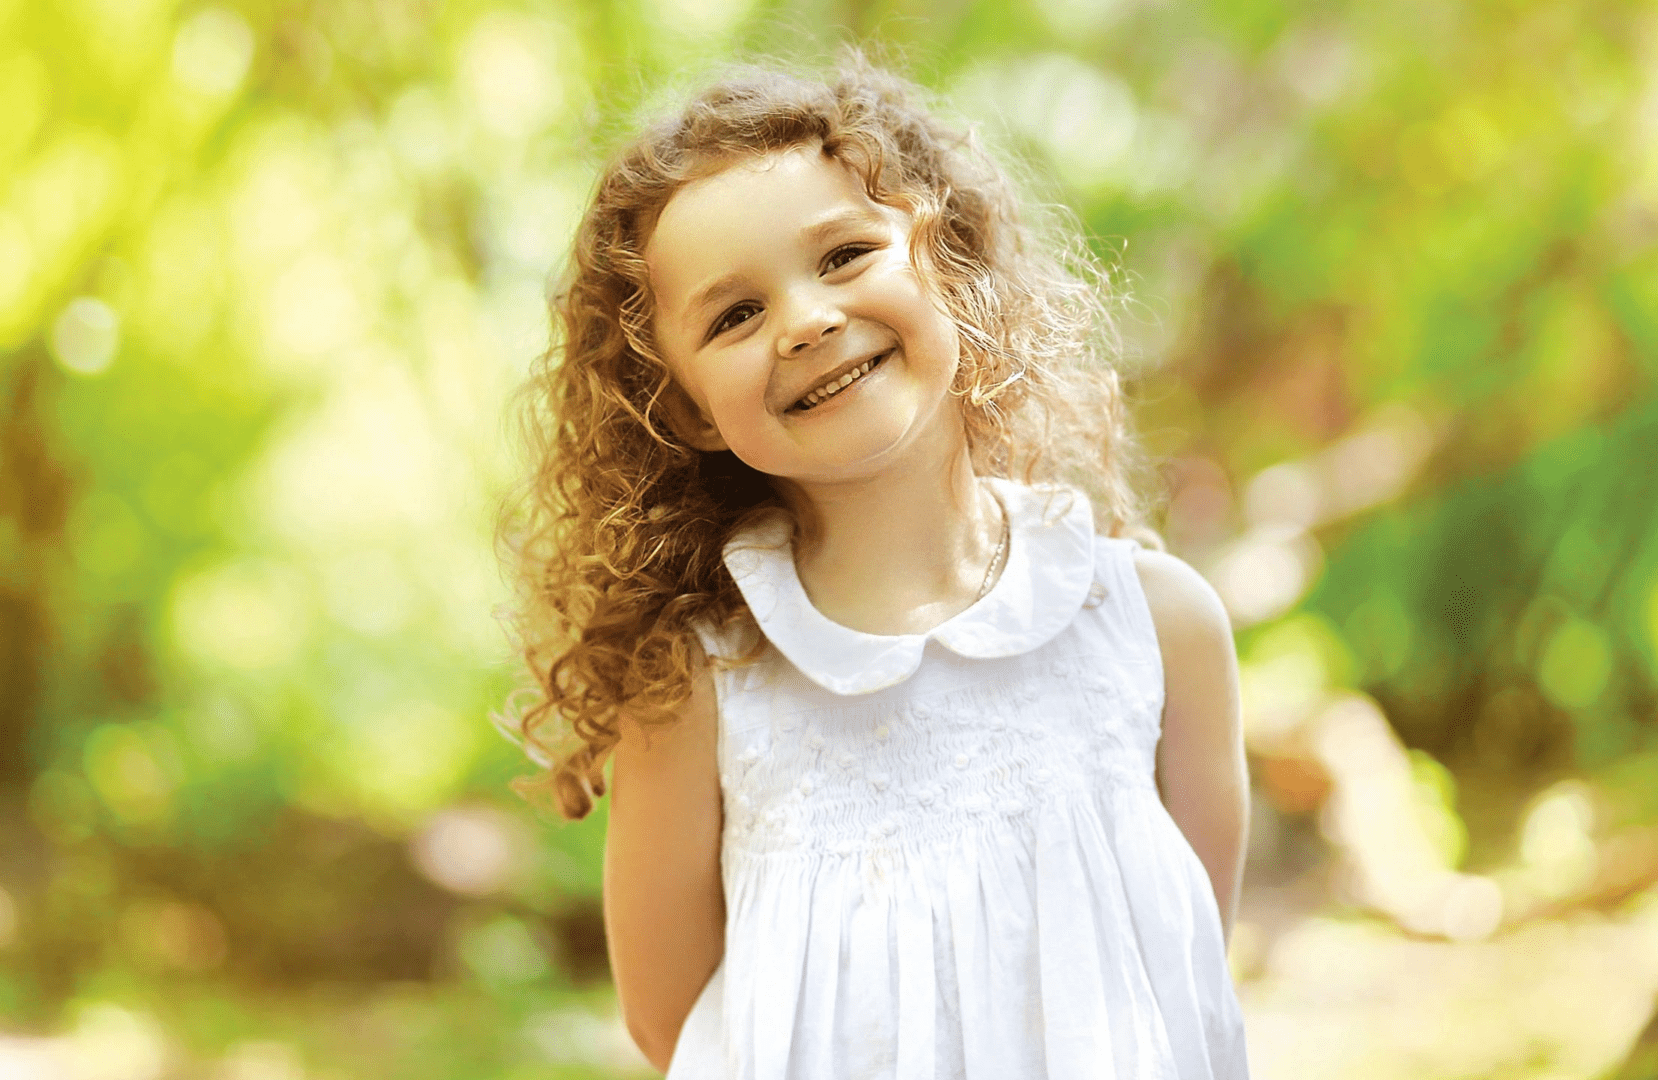 A little girl outdoors smiling